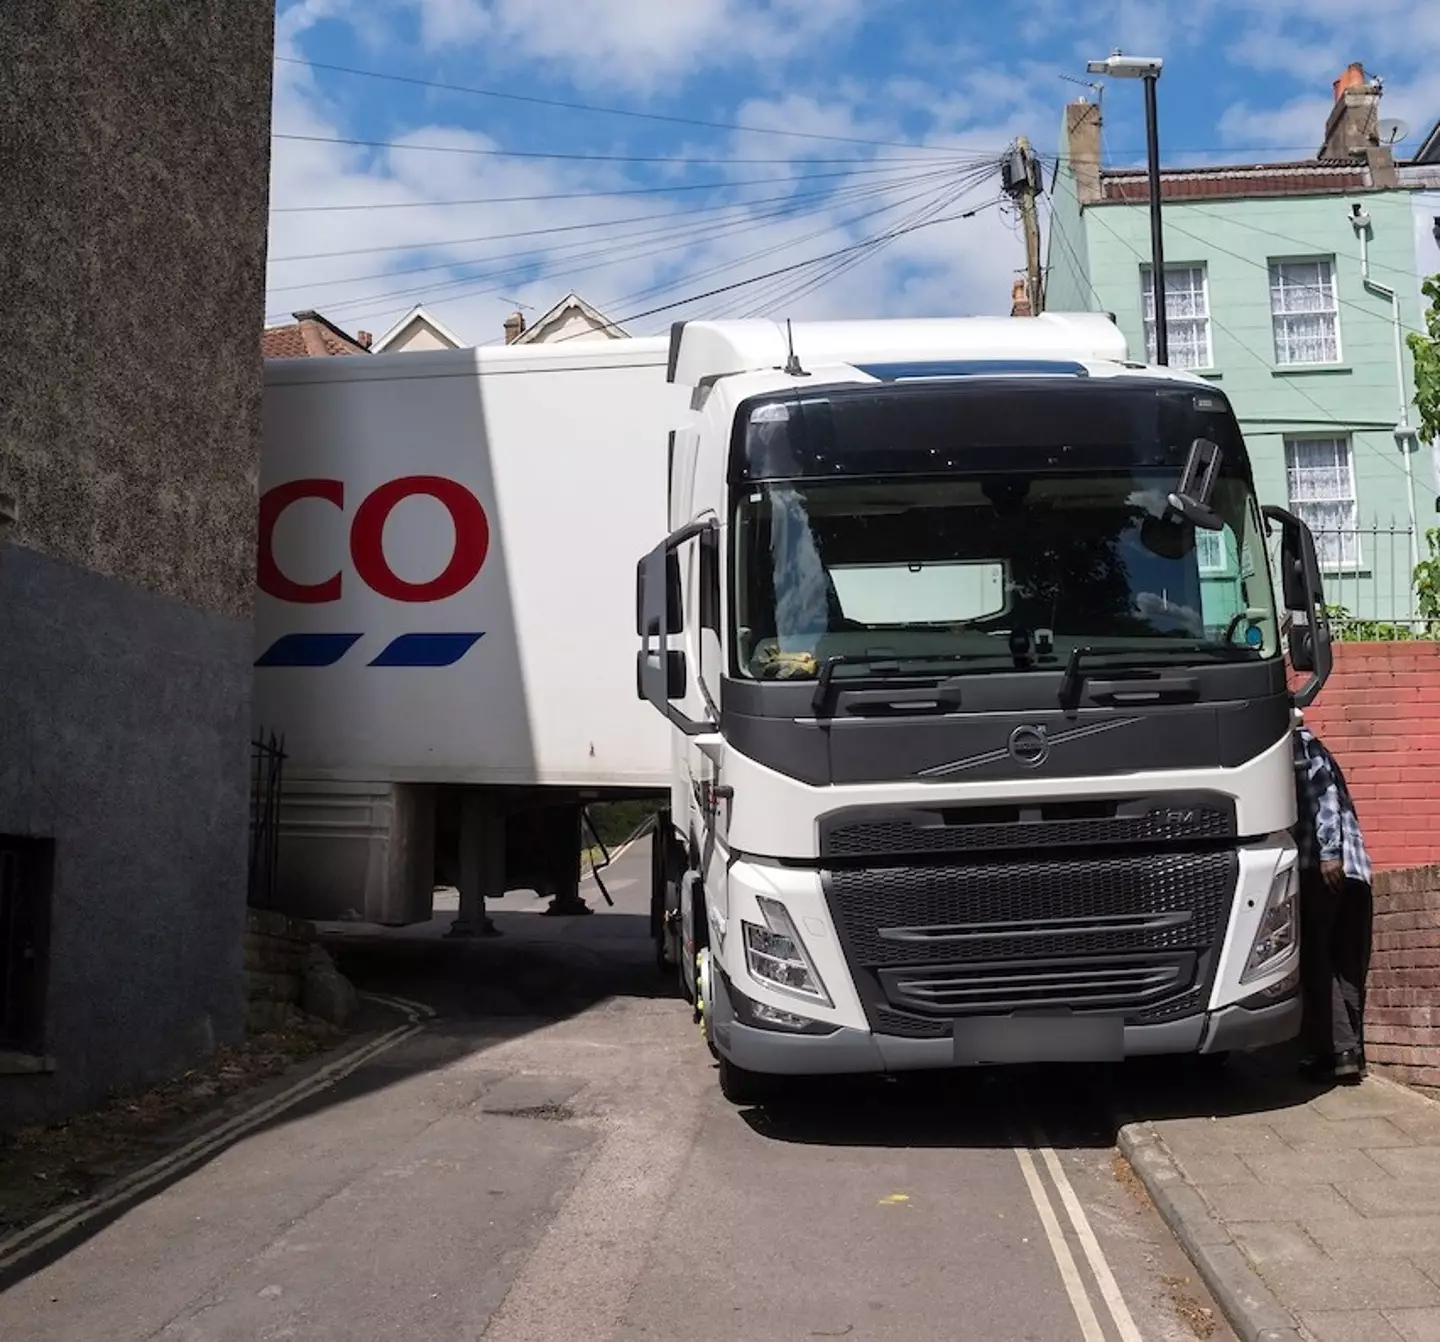 A Tesco lorry driver took the wrong turn.